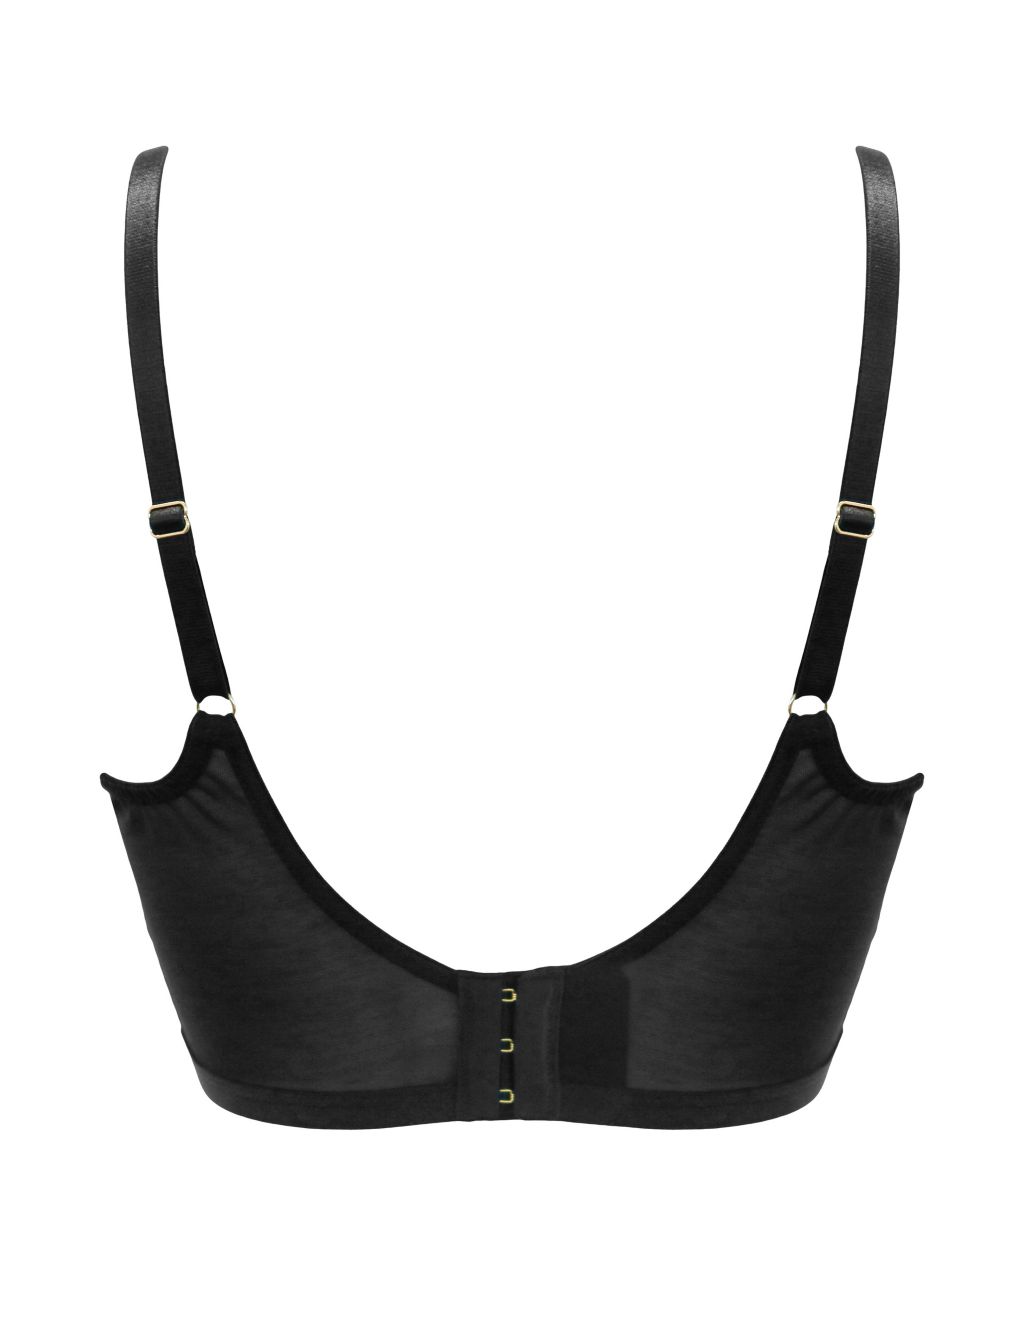 After Hours Wired Longline Bra B-G image 6